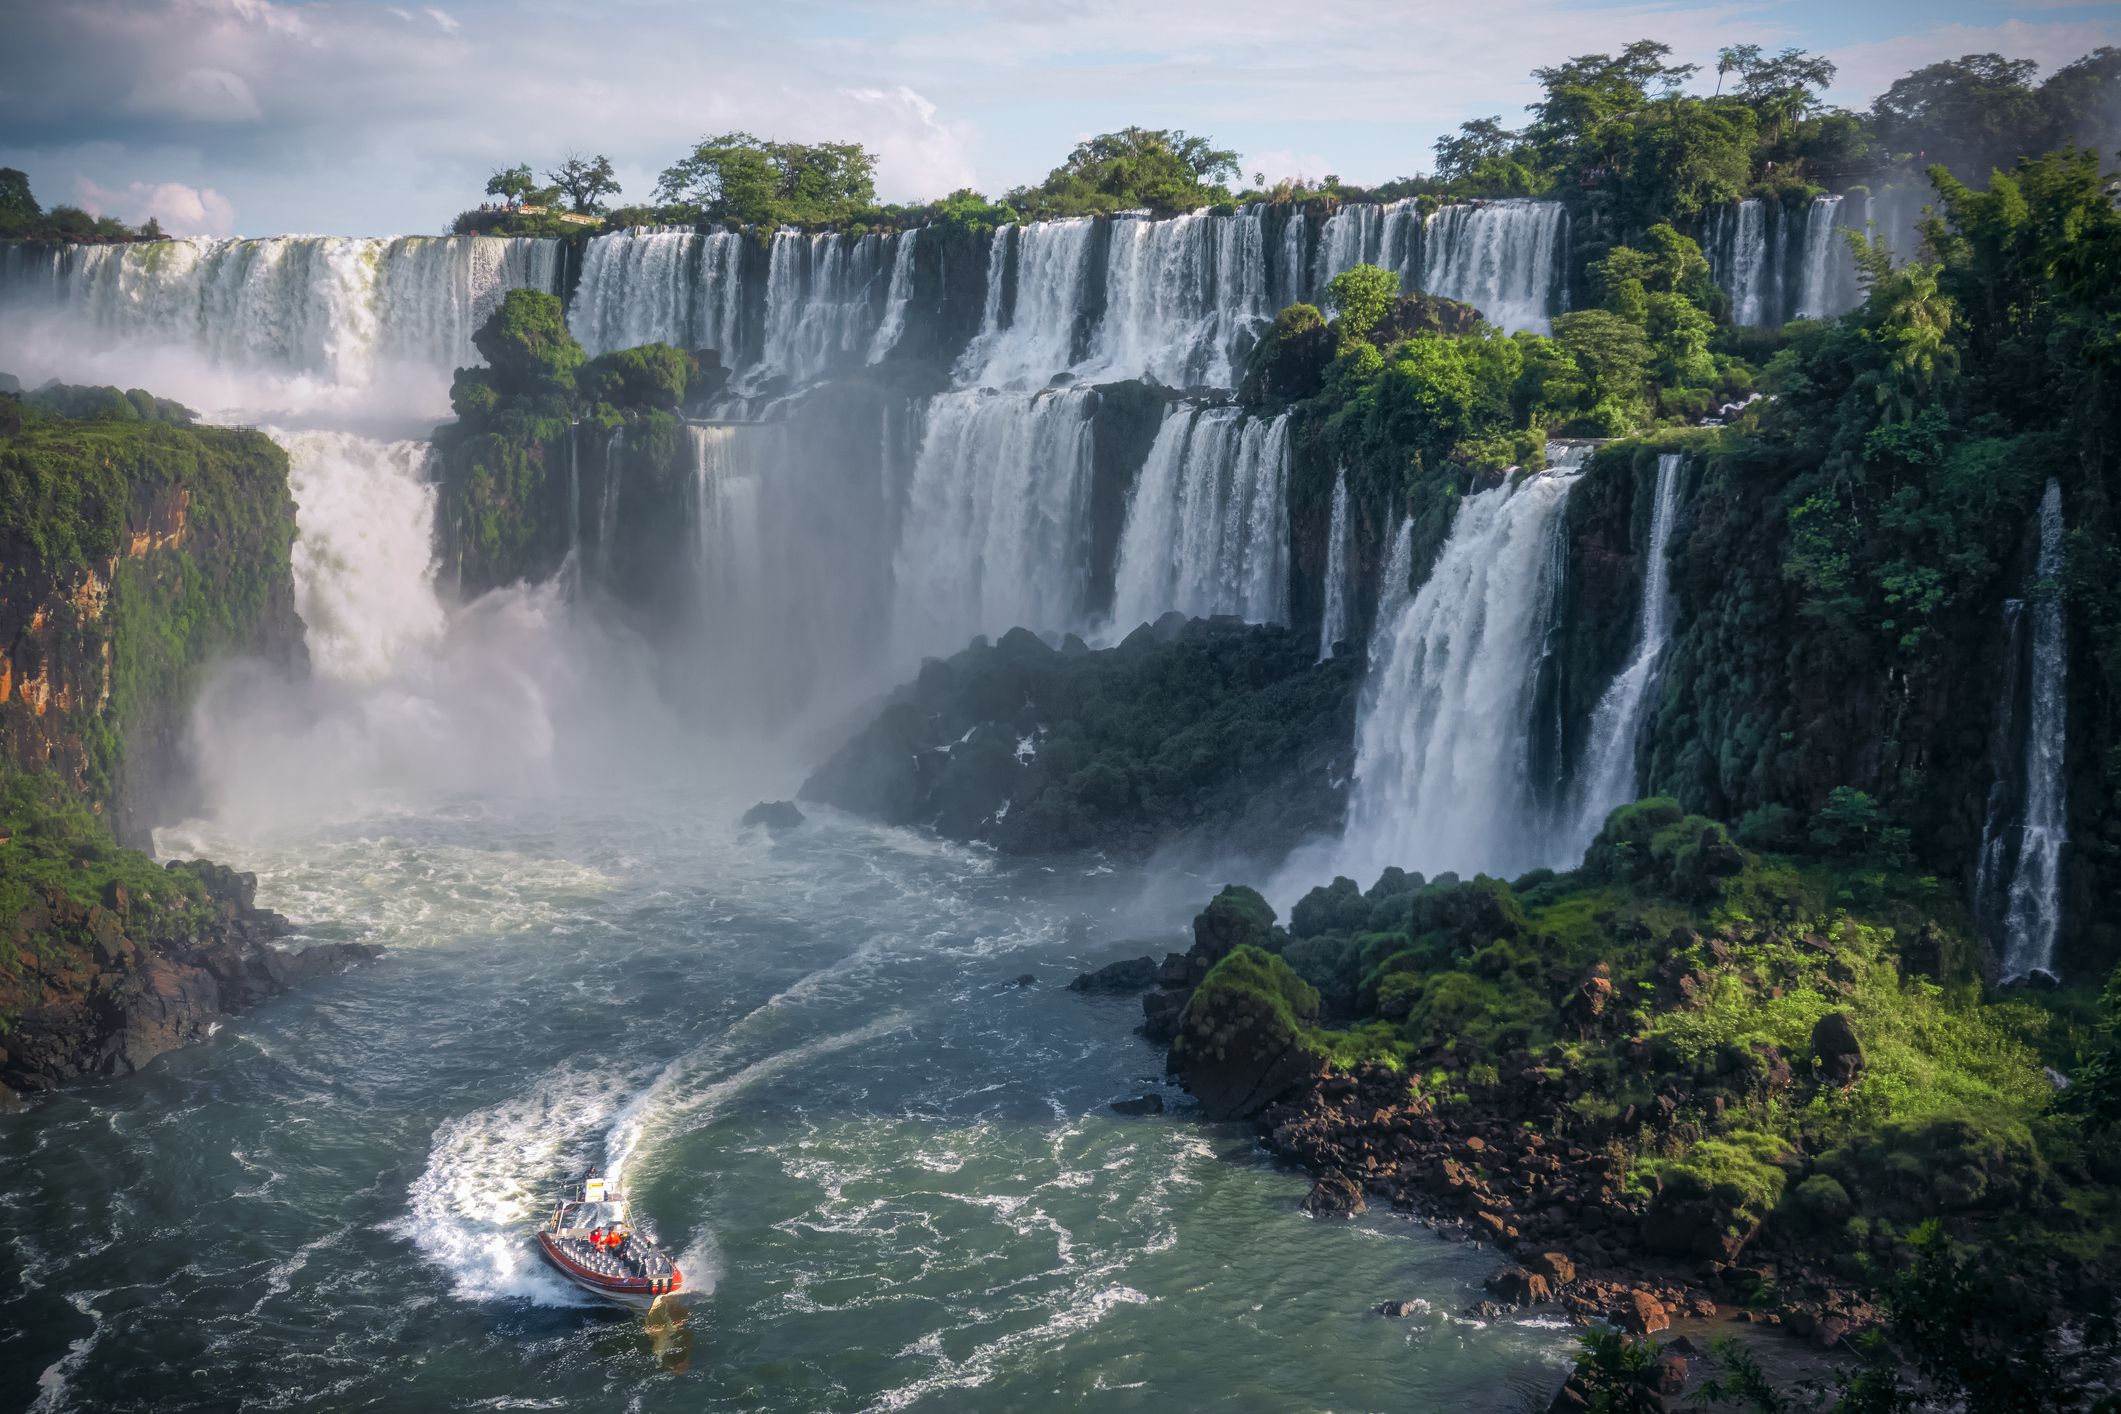 A beautiful shot of iguaza falls with a small boat